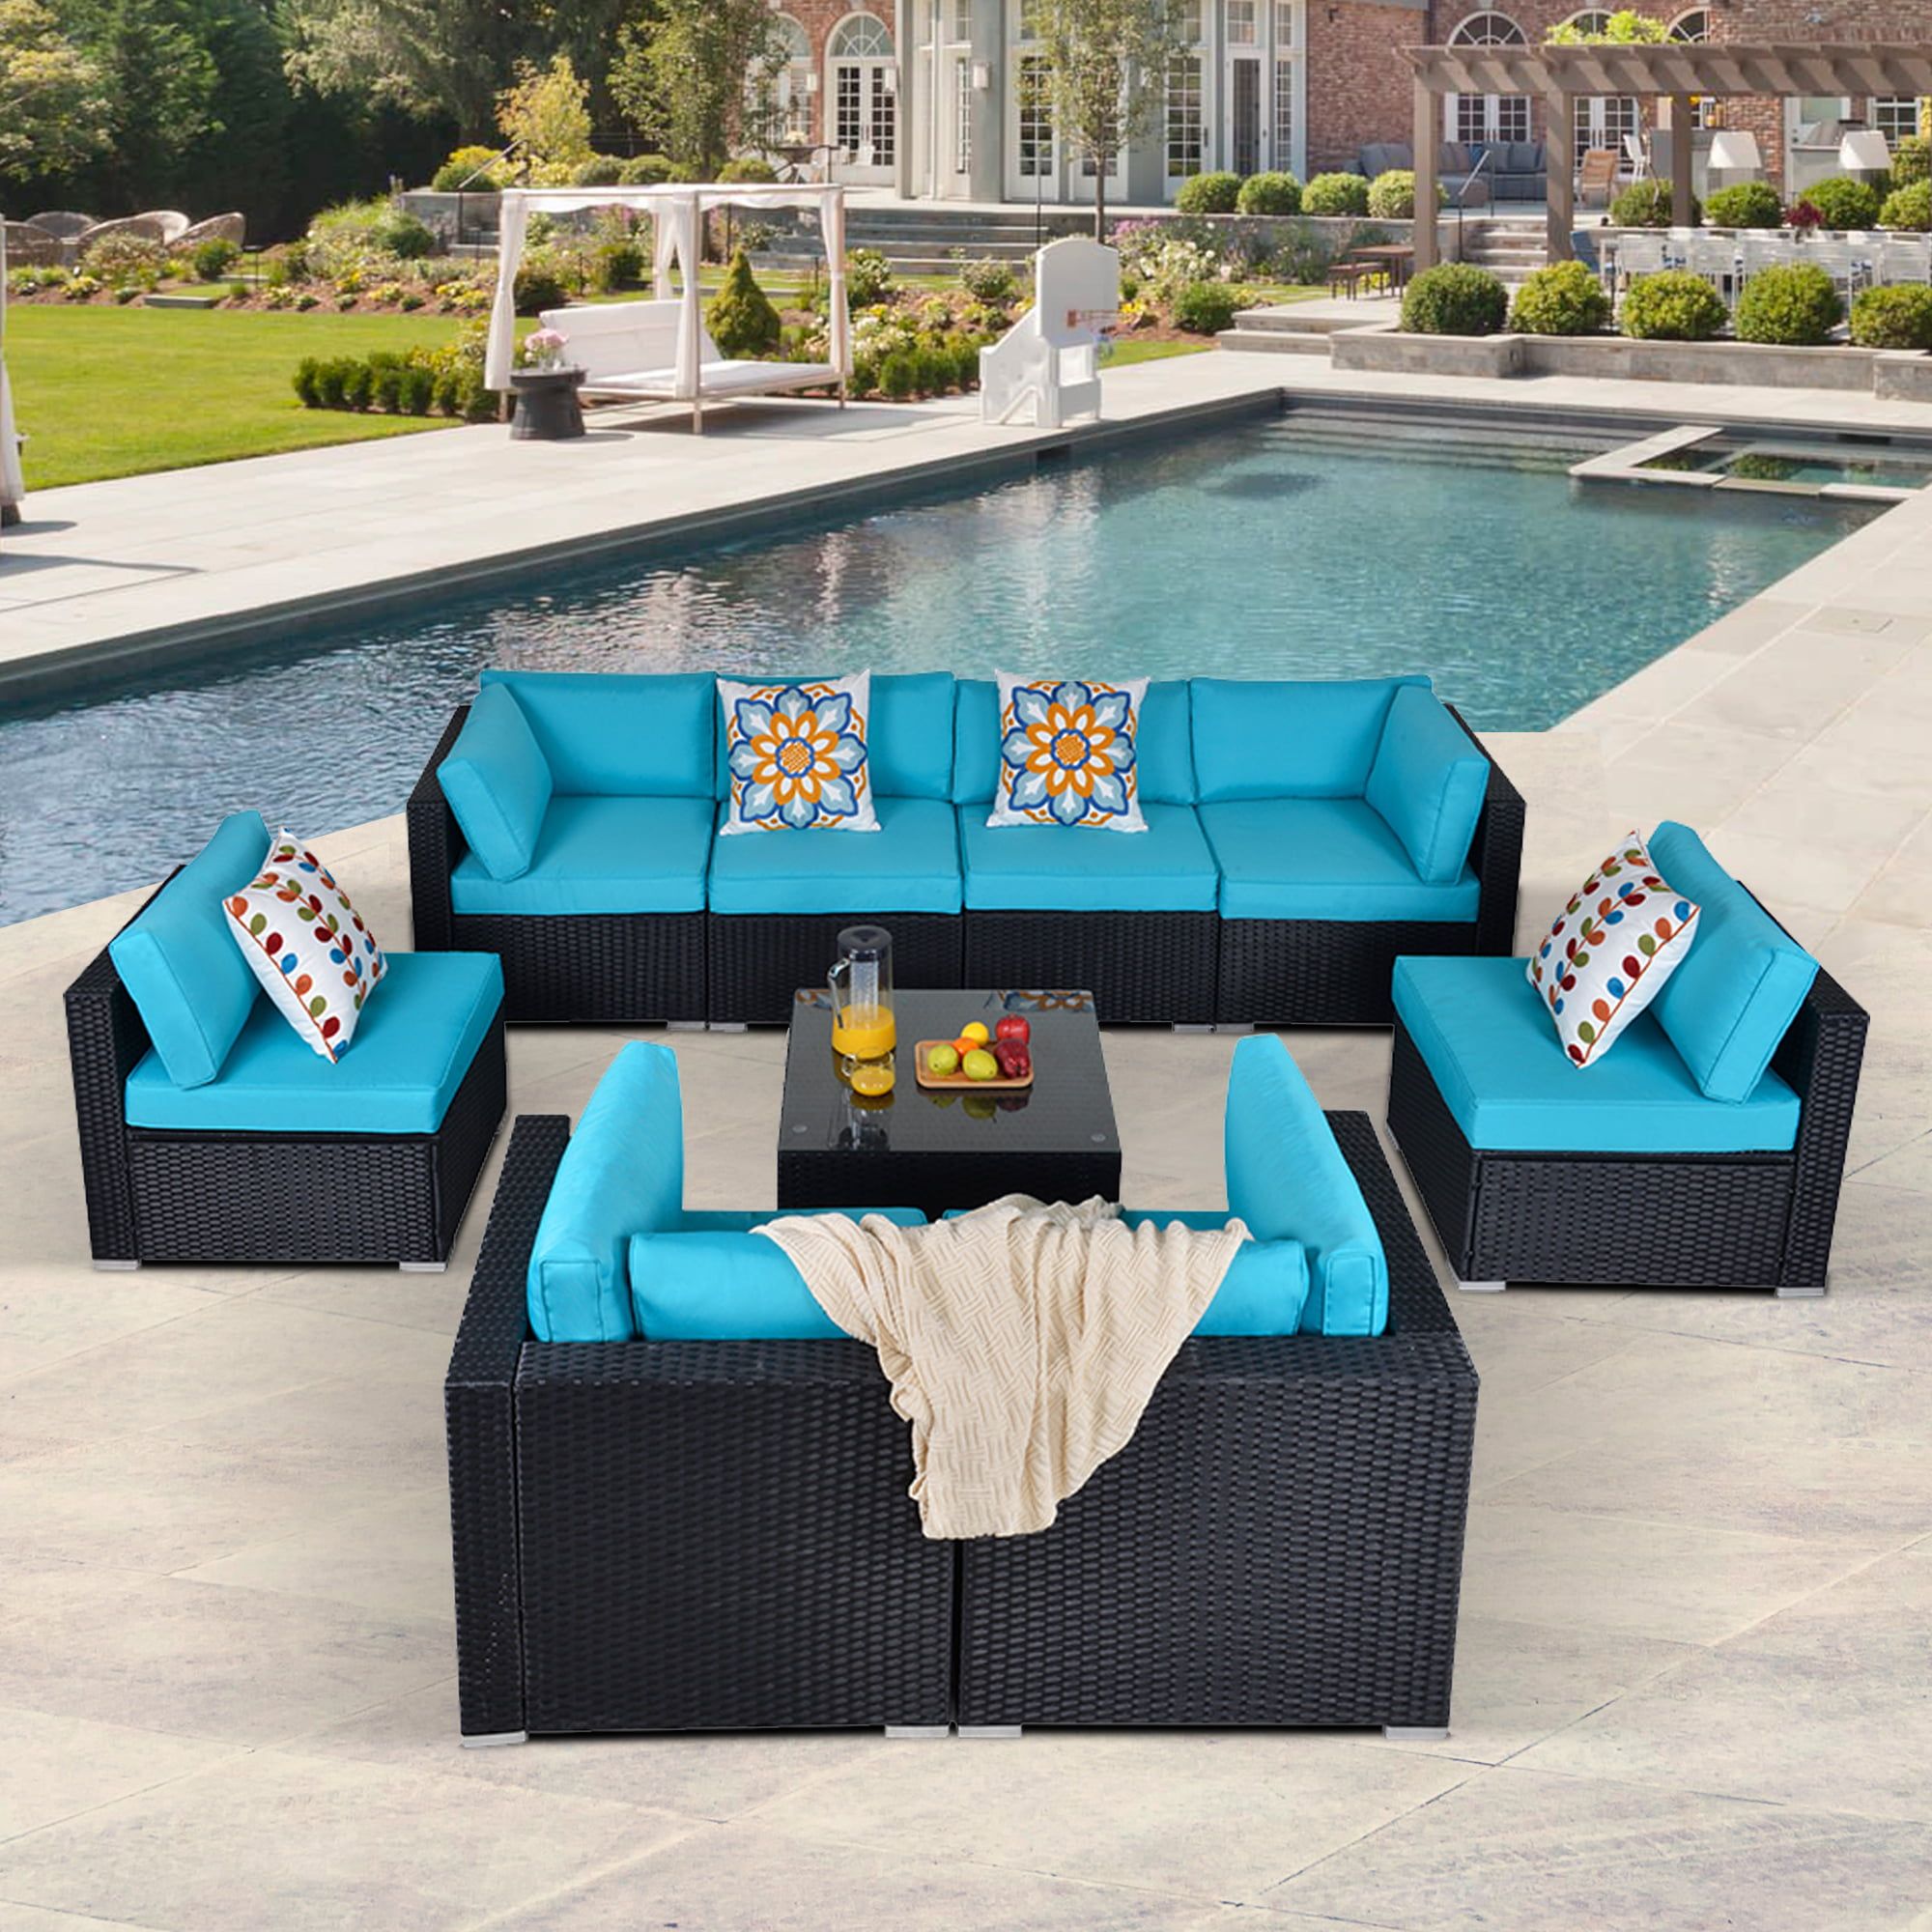 Featured Photo of The Best All-weather Rattan Conversation Set